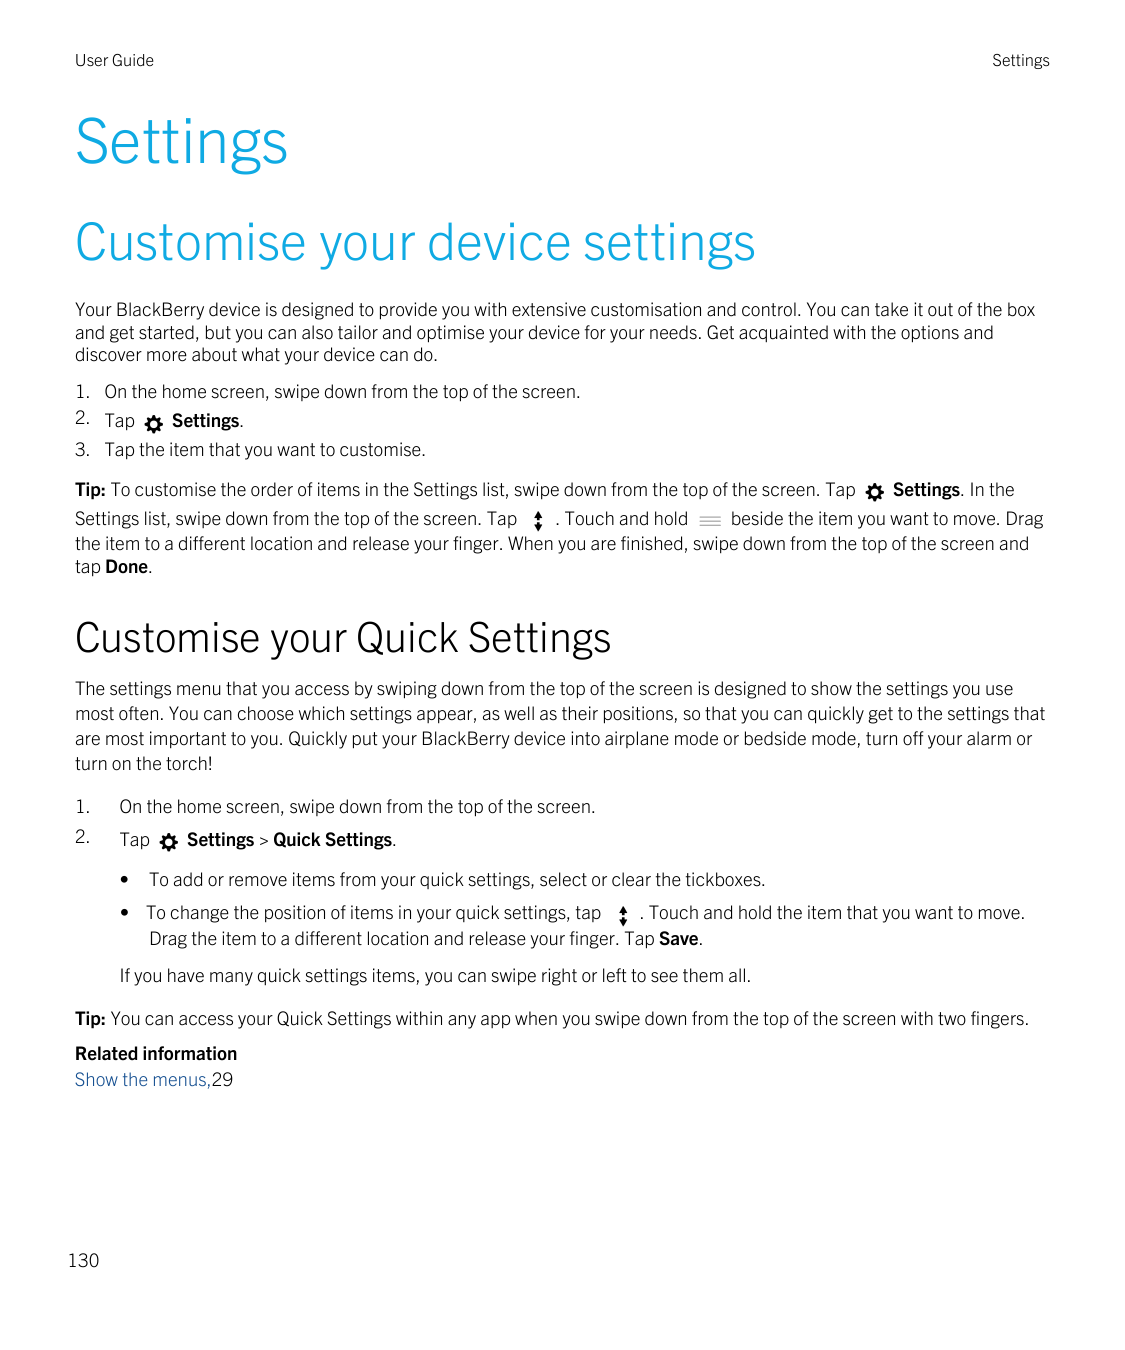 User GuideSettingsSettingsCustomise your device settingsYour BlackBerry device is designed to provide you with extensive customi